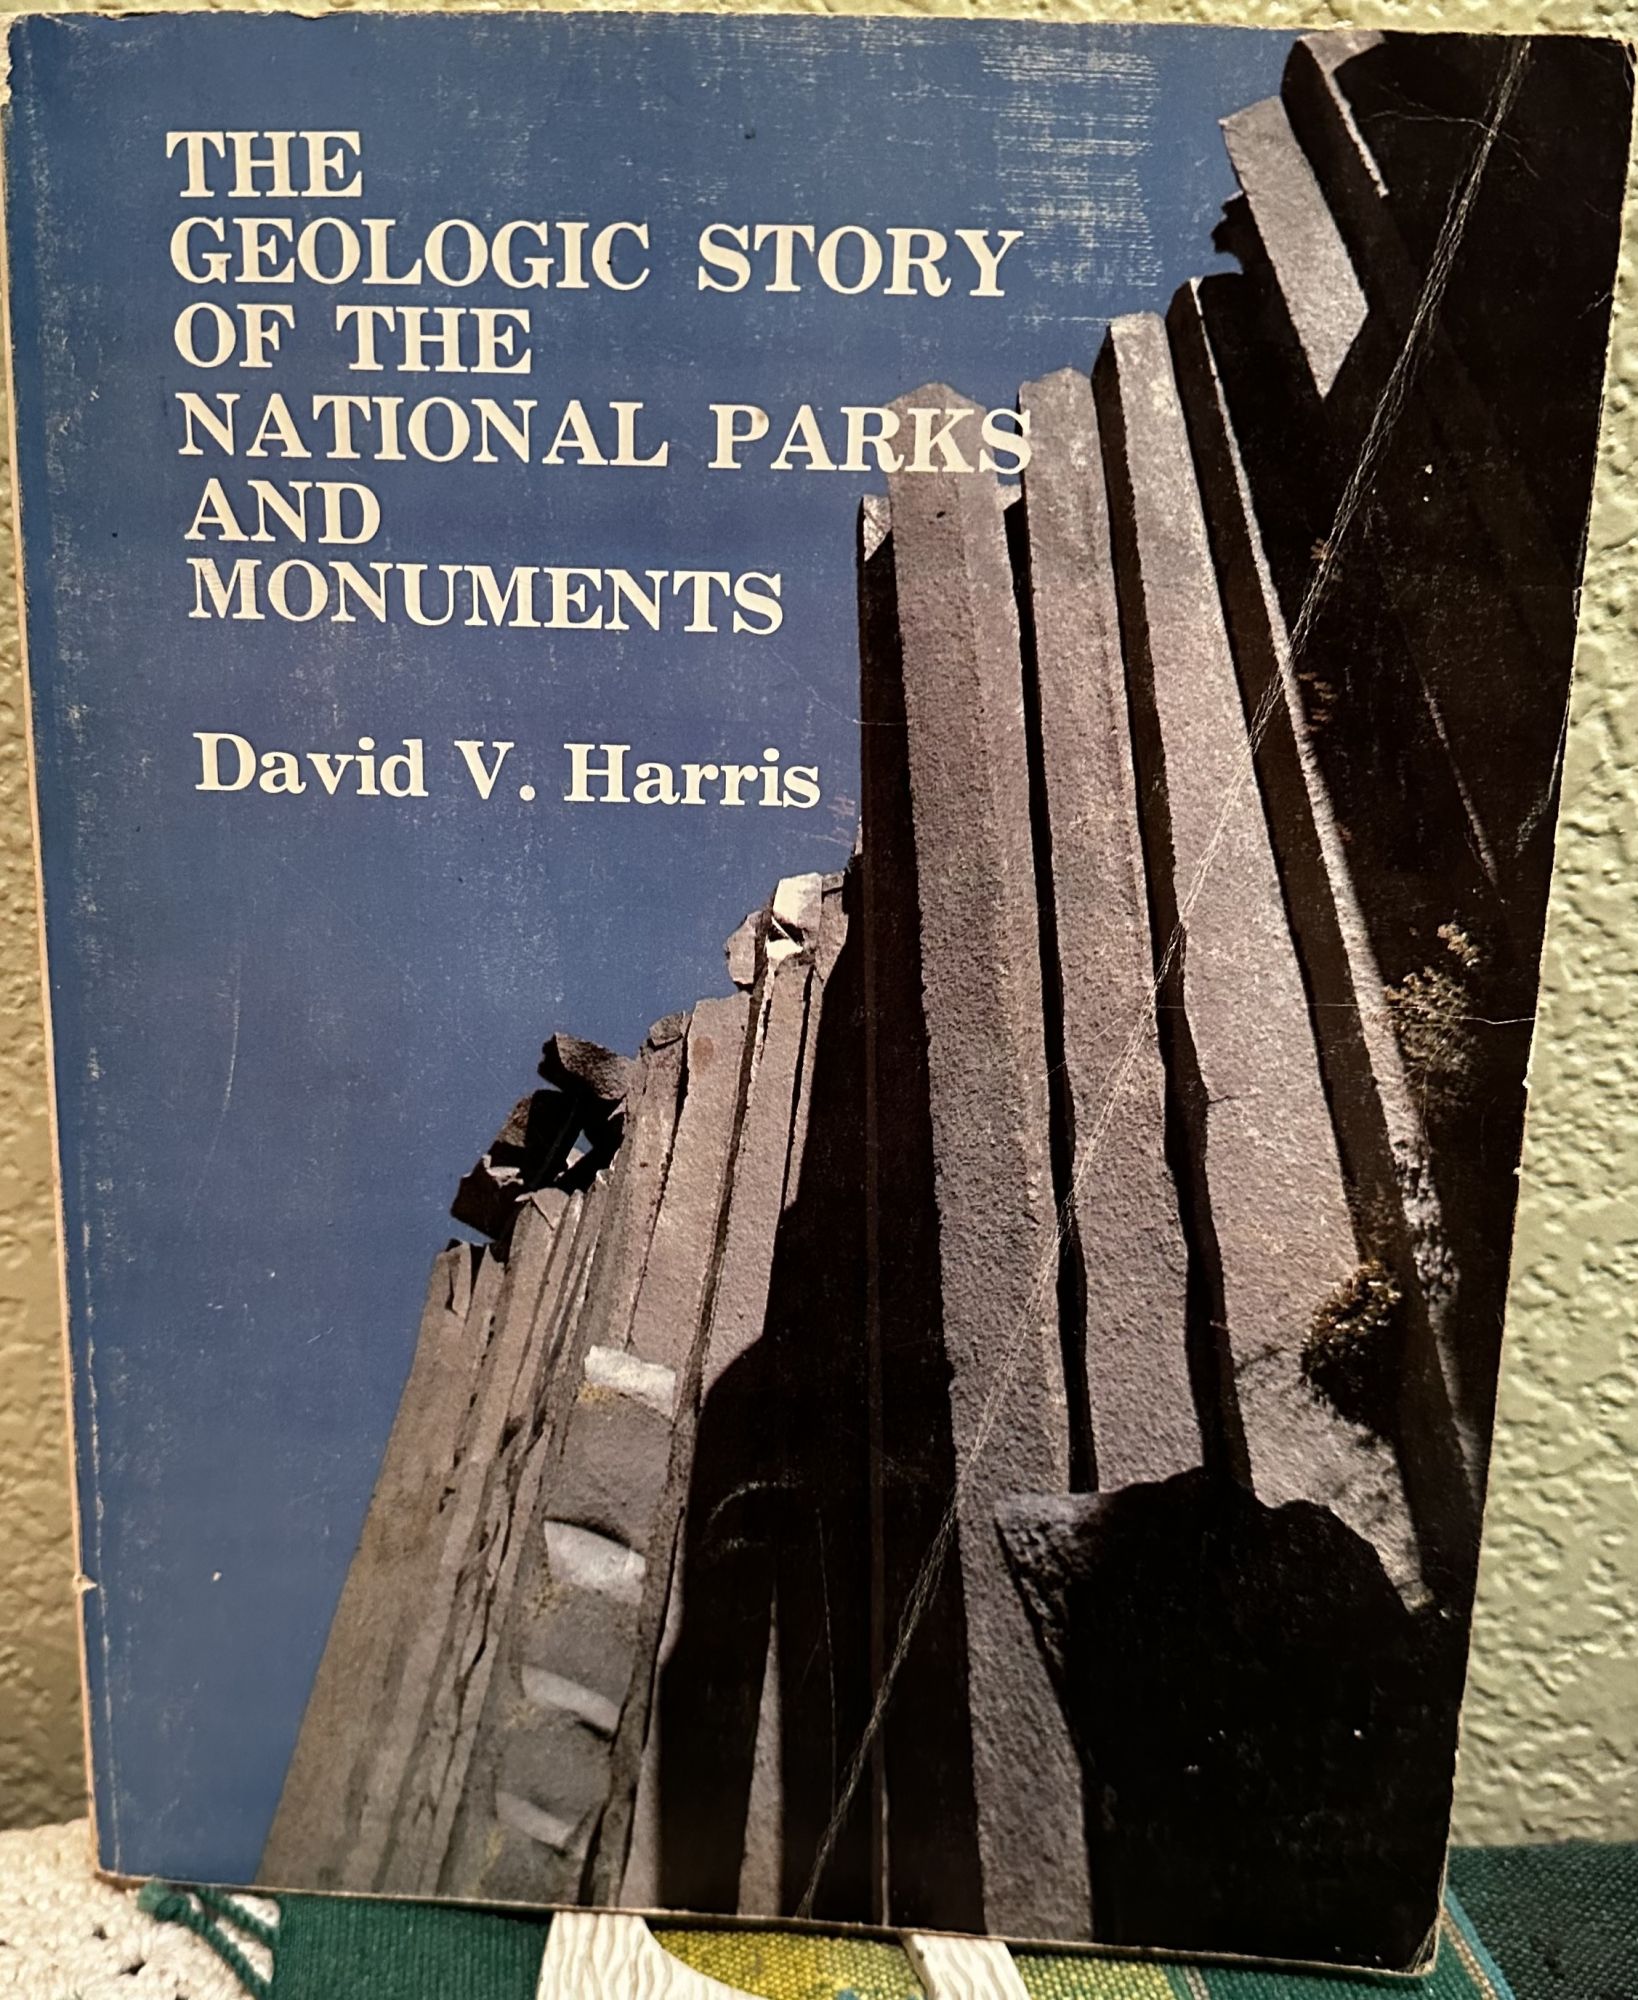 The geologic story of the national parks and monuments. David V. Harris.